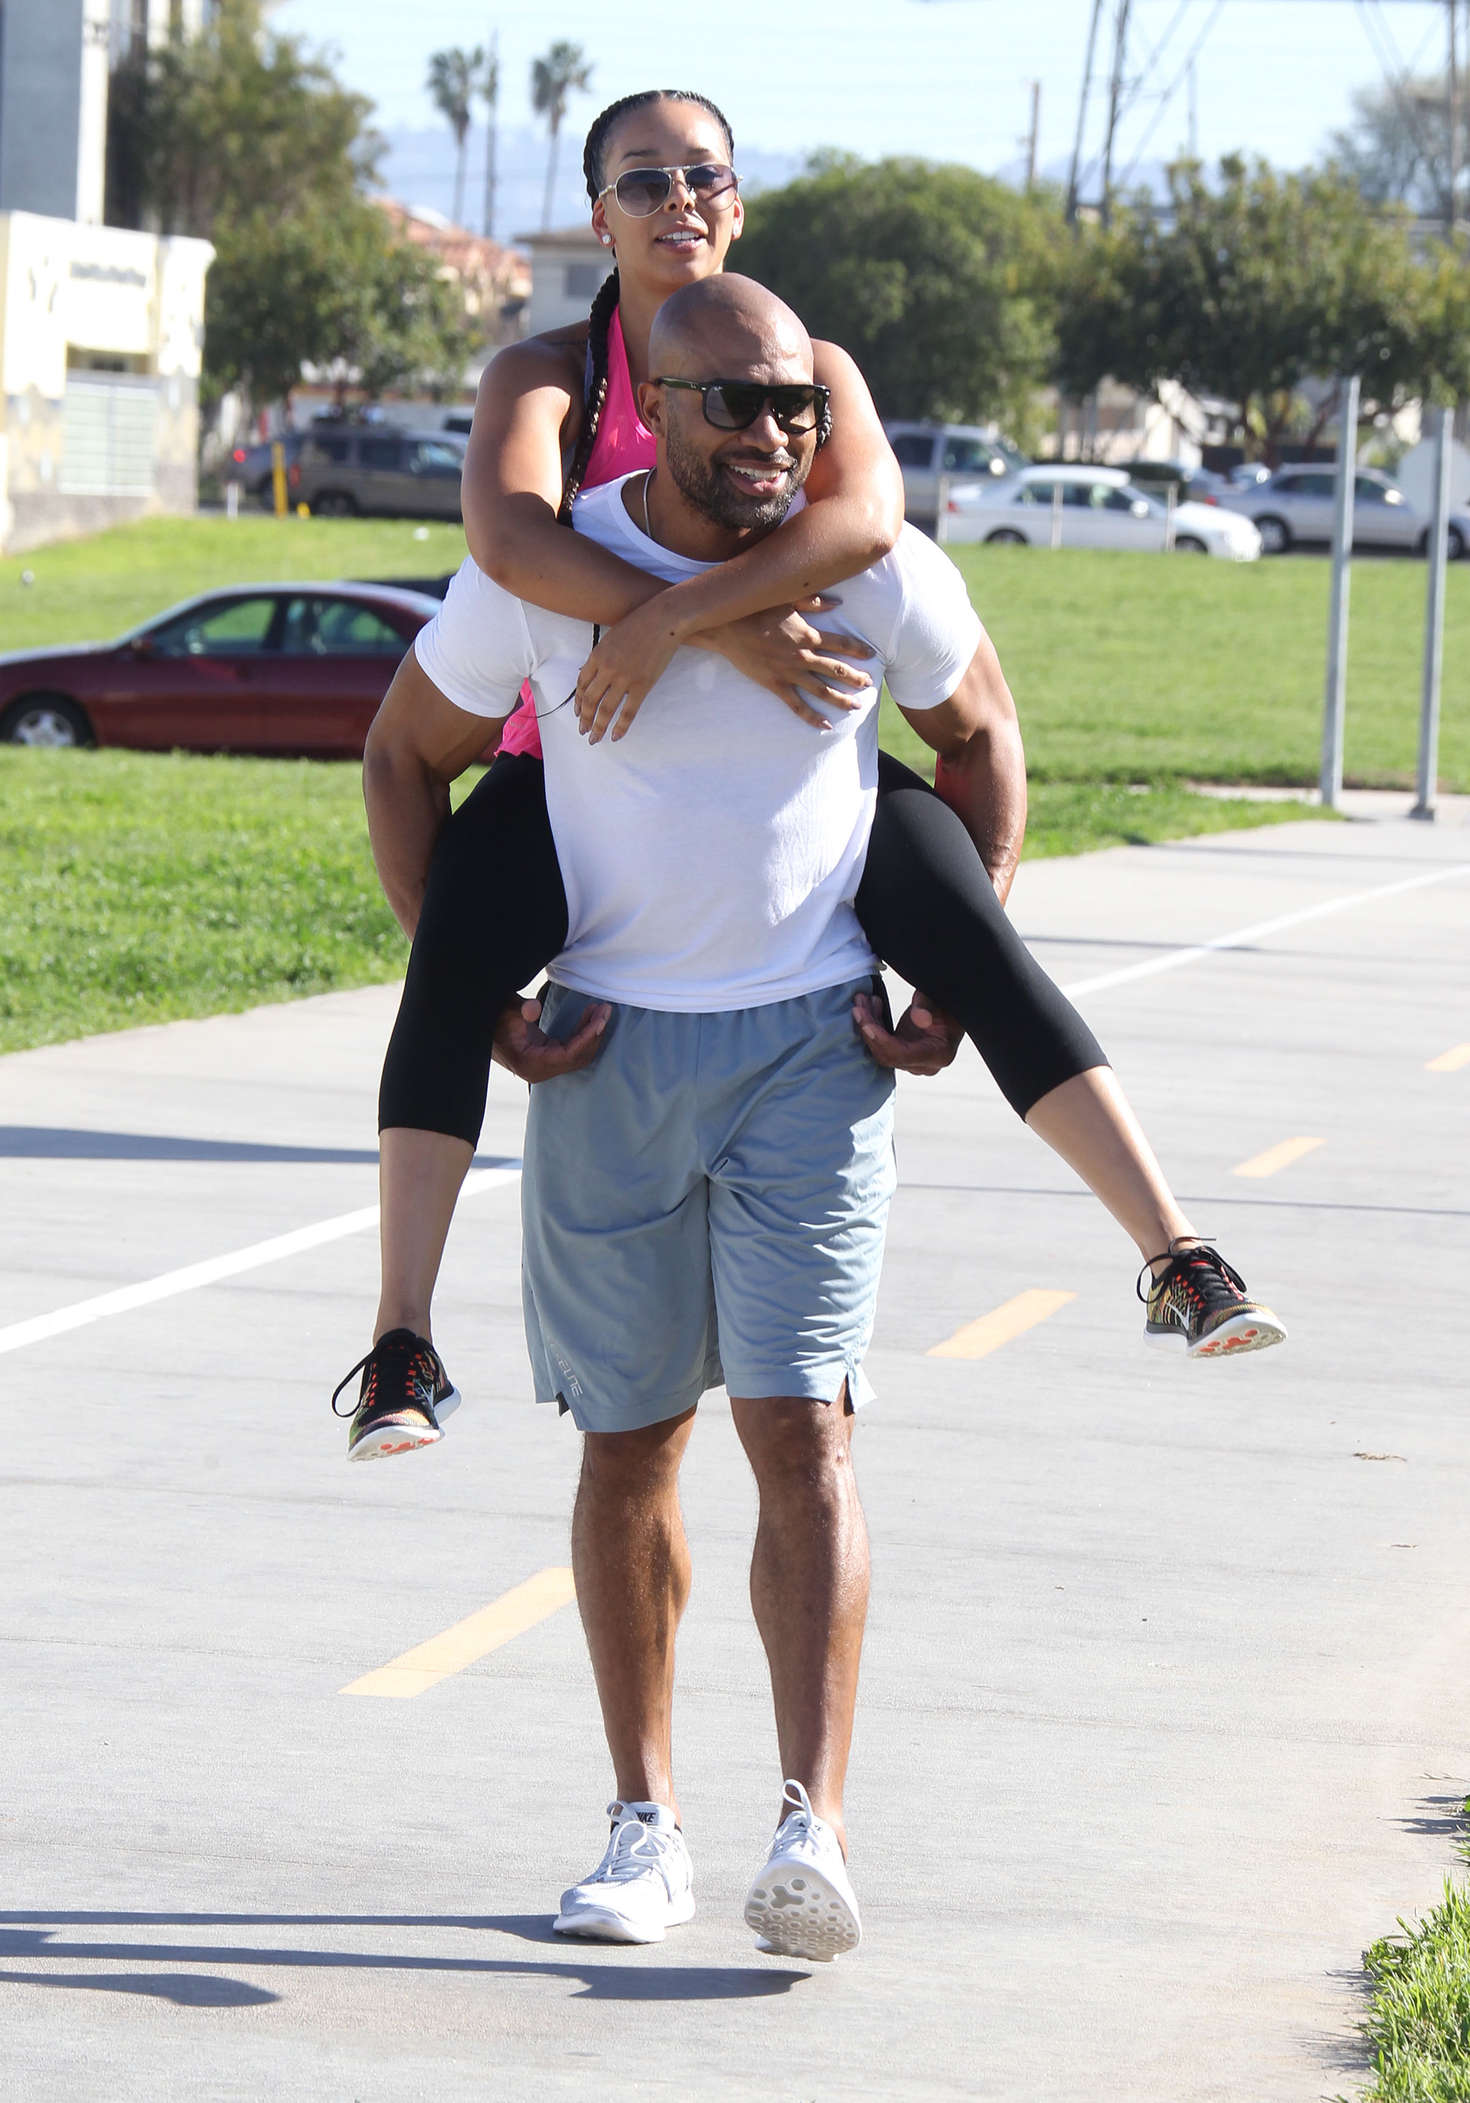 Gloria Govan with boyfriend out in Los Angeles